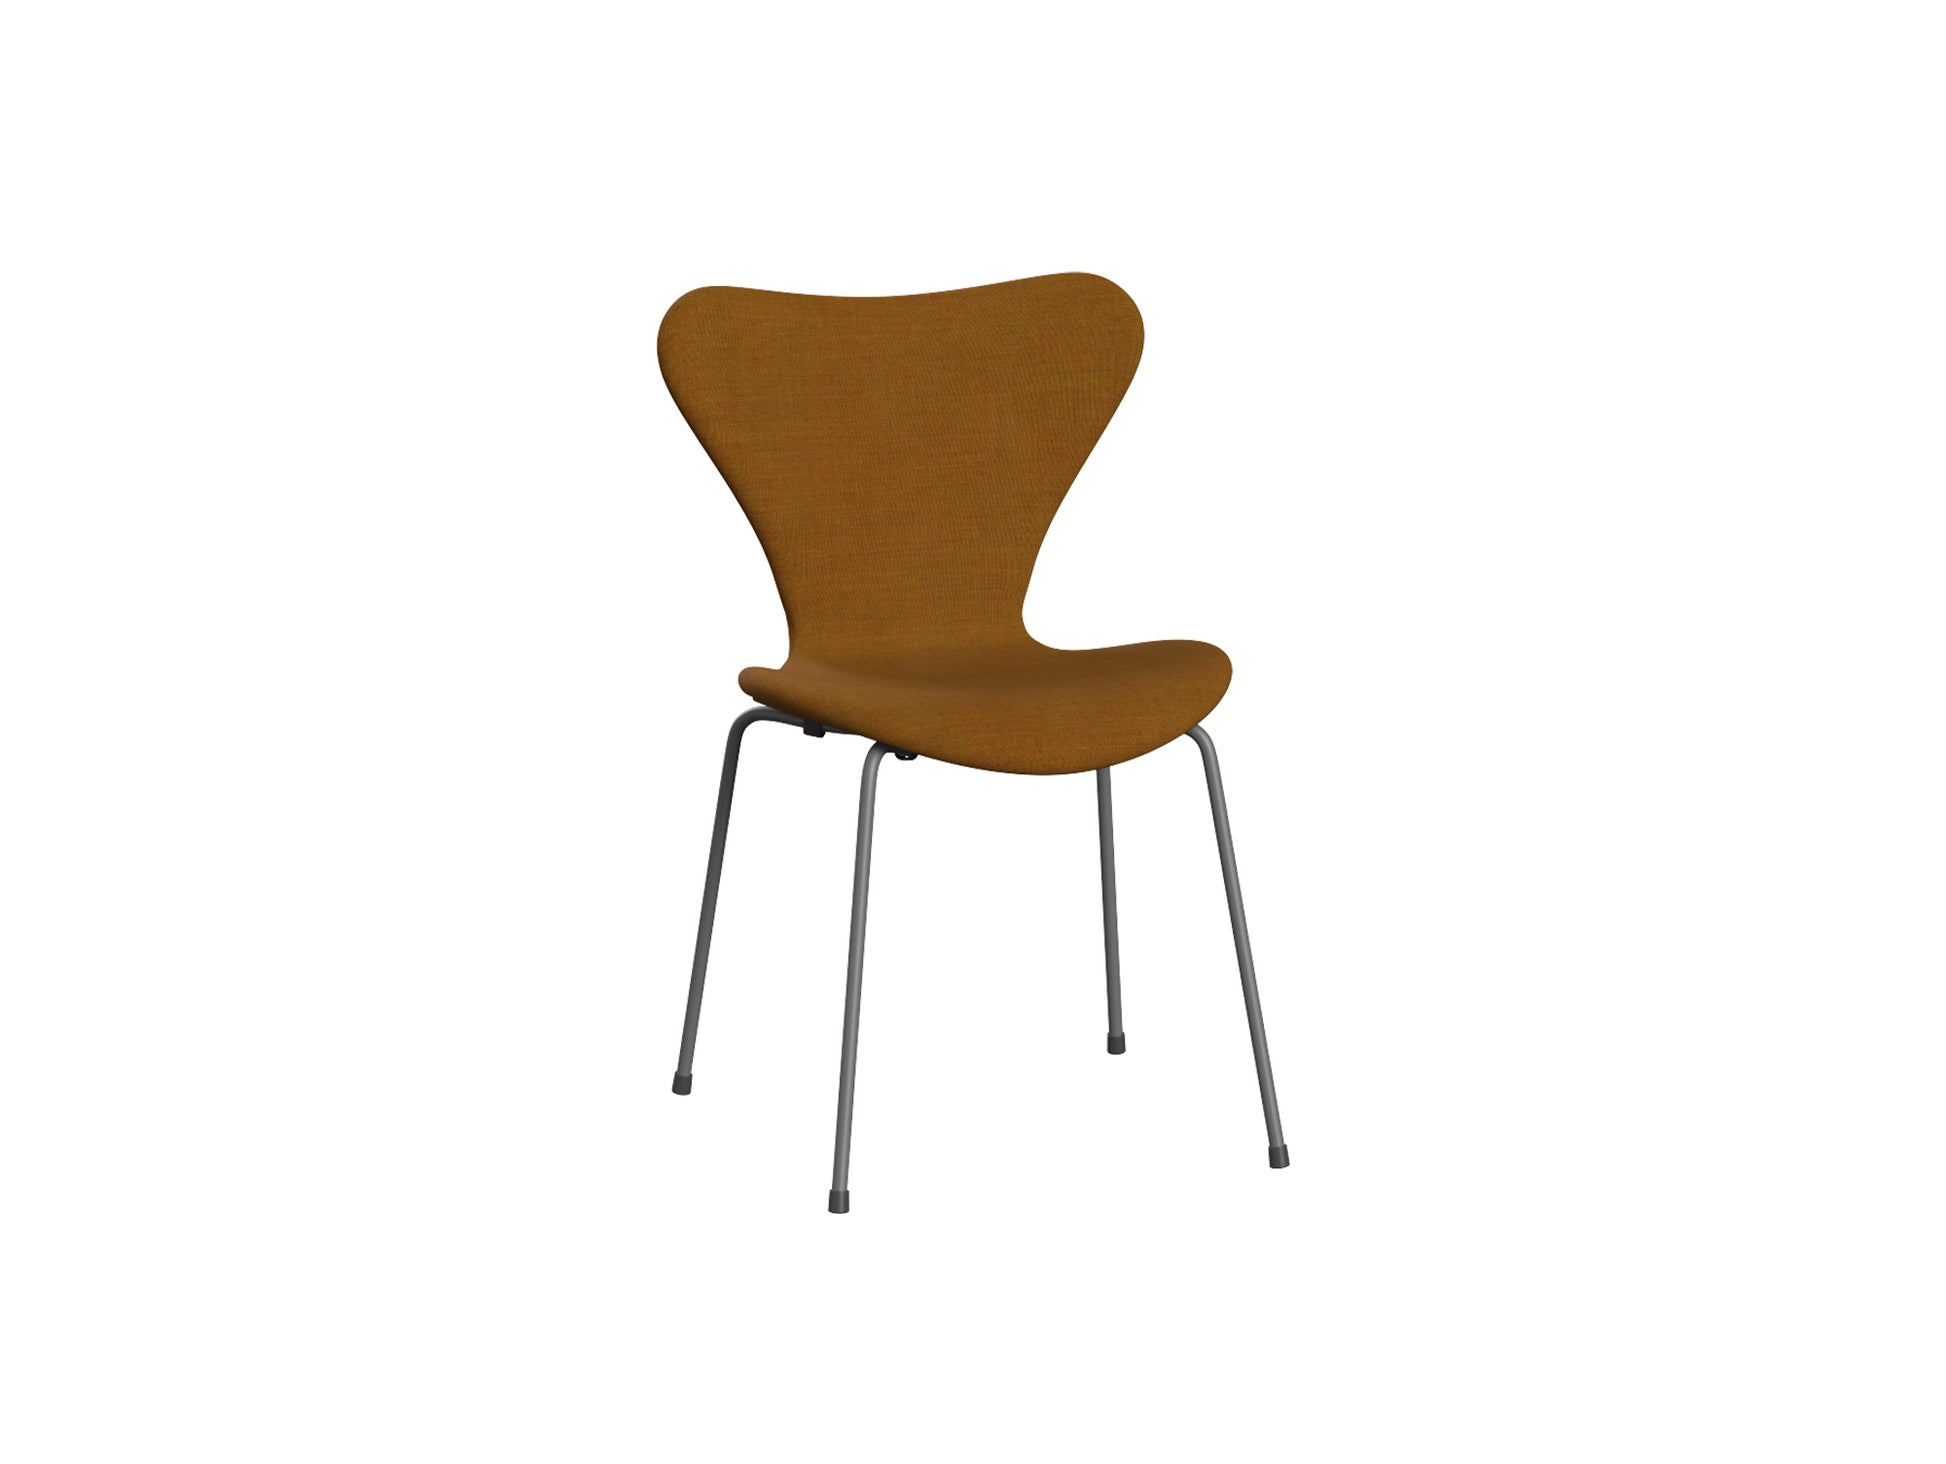 Series 7™ 3107 Dining Chair (Fully Upholstered) by Fritz Hansen - Silver Grey Steel / Remix 422